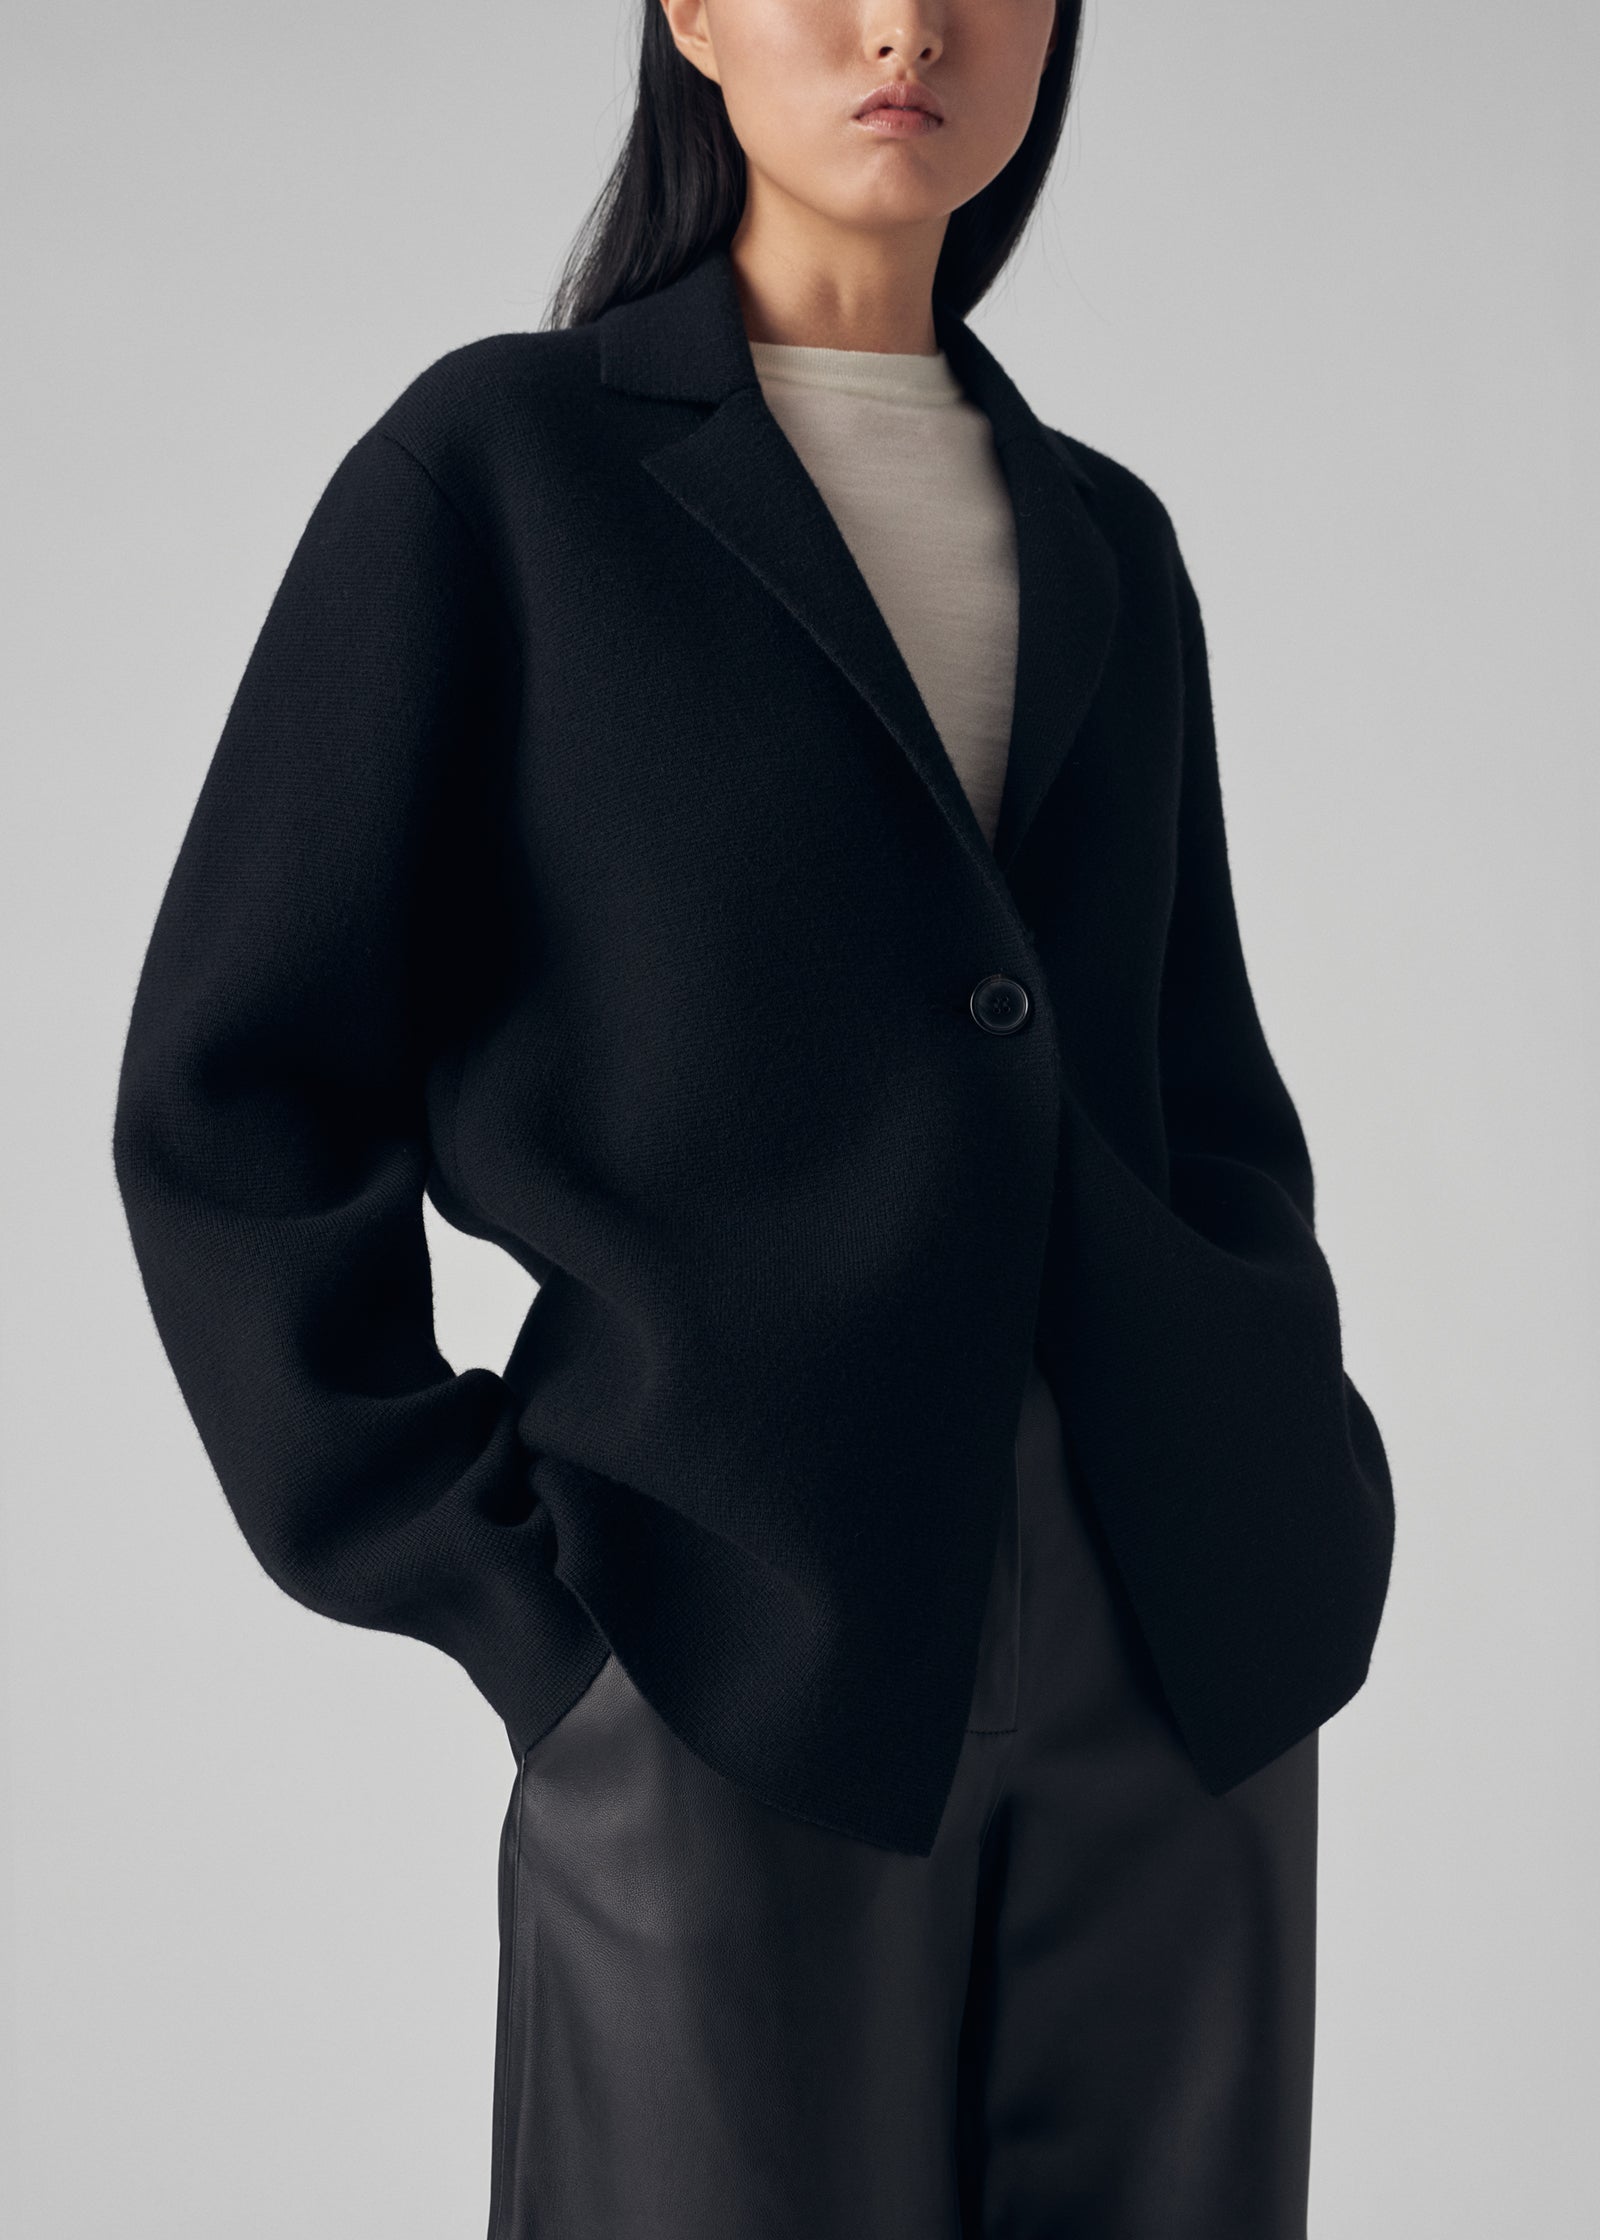 Compact Knit Blazer in Merino Wool - CO Collections